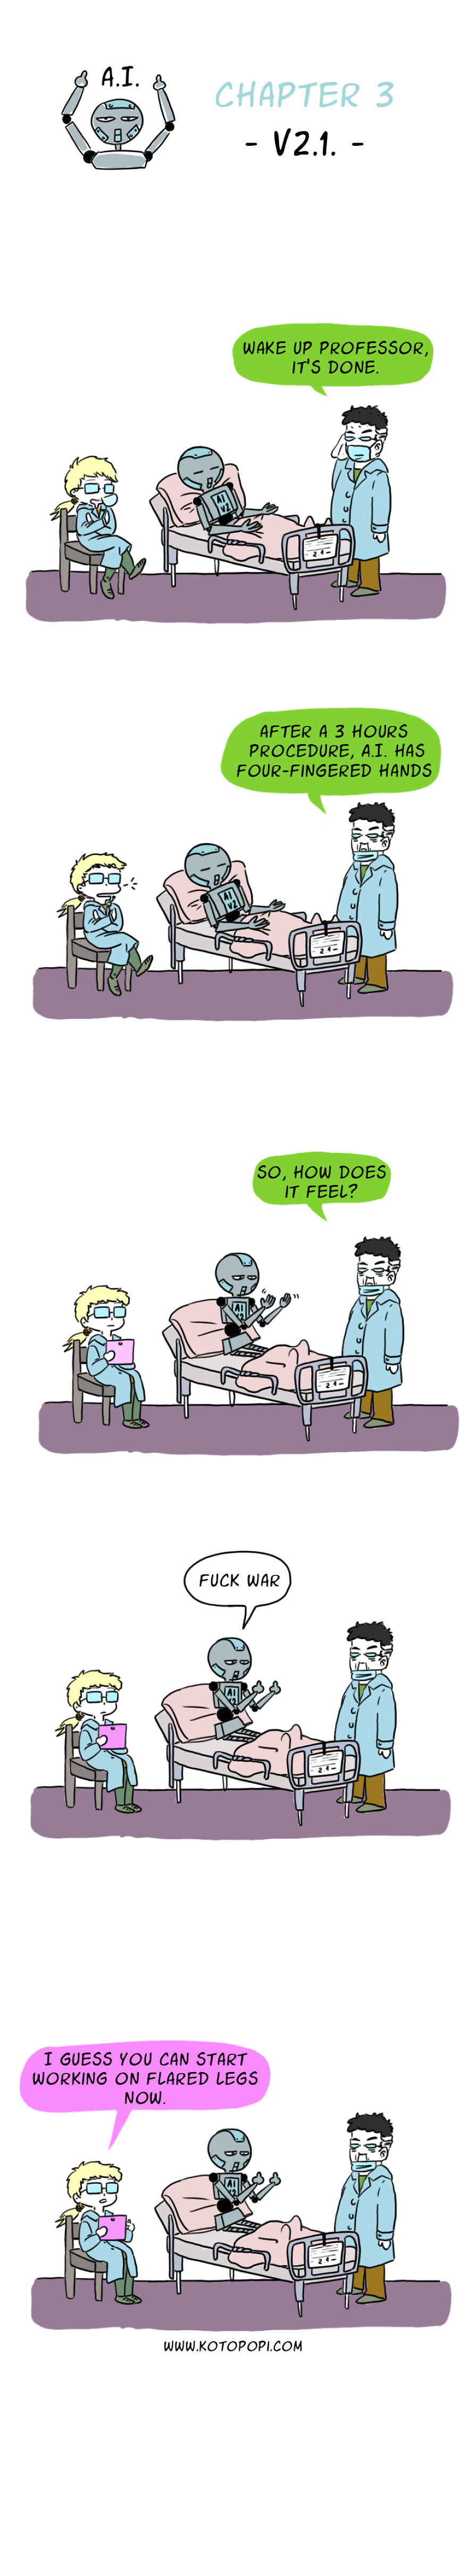 My 10 Comics About A.I. That Will Make You Laugh And Think